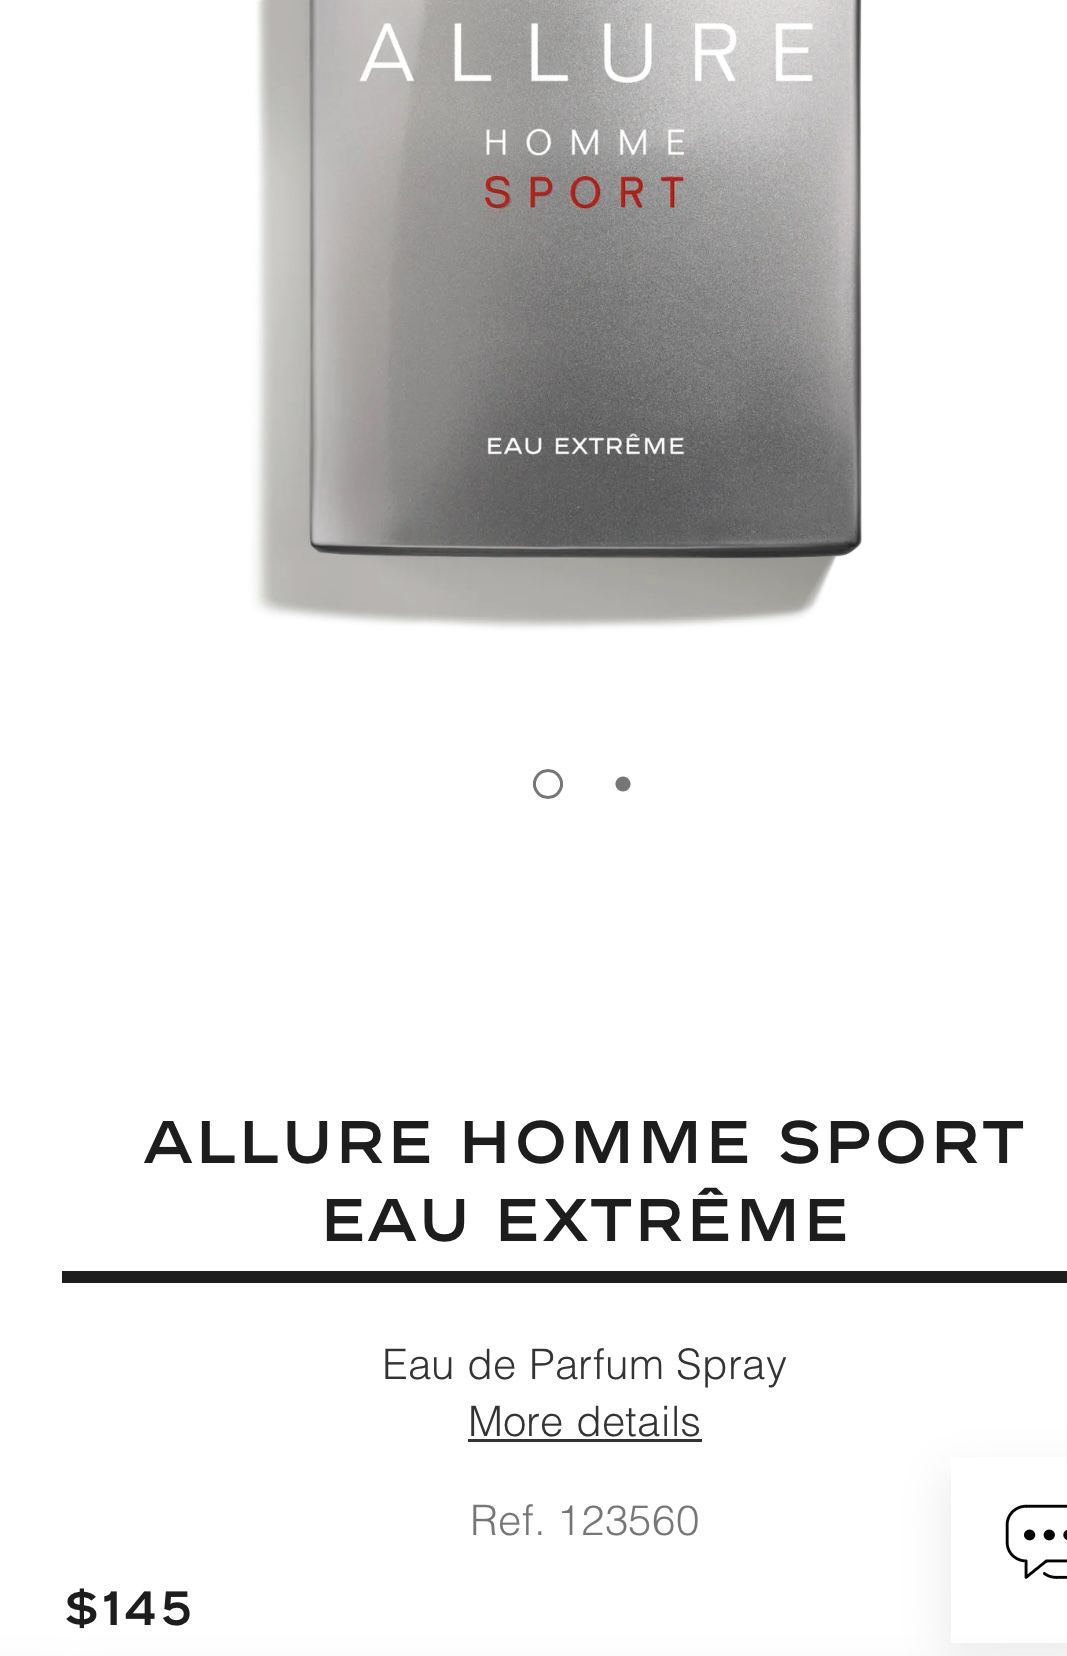 Chanel Allure Homme Sport Extreme 100ml for Sale in Hollywood, FL - OfferUp